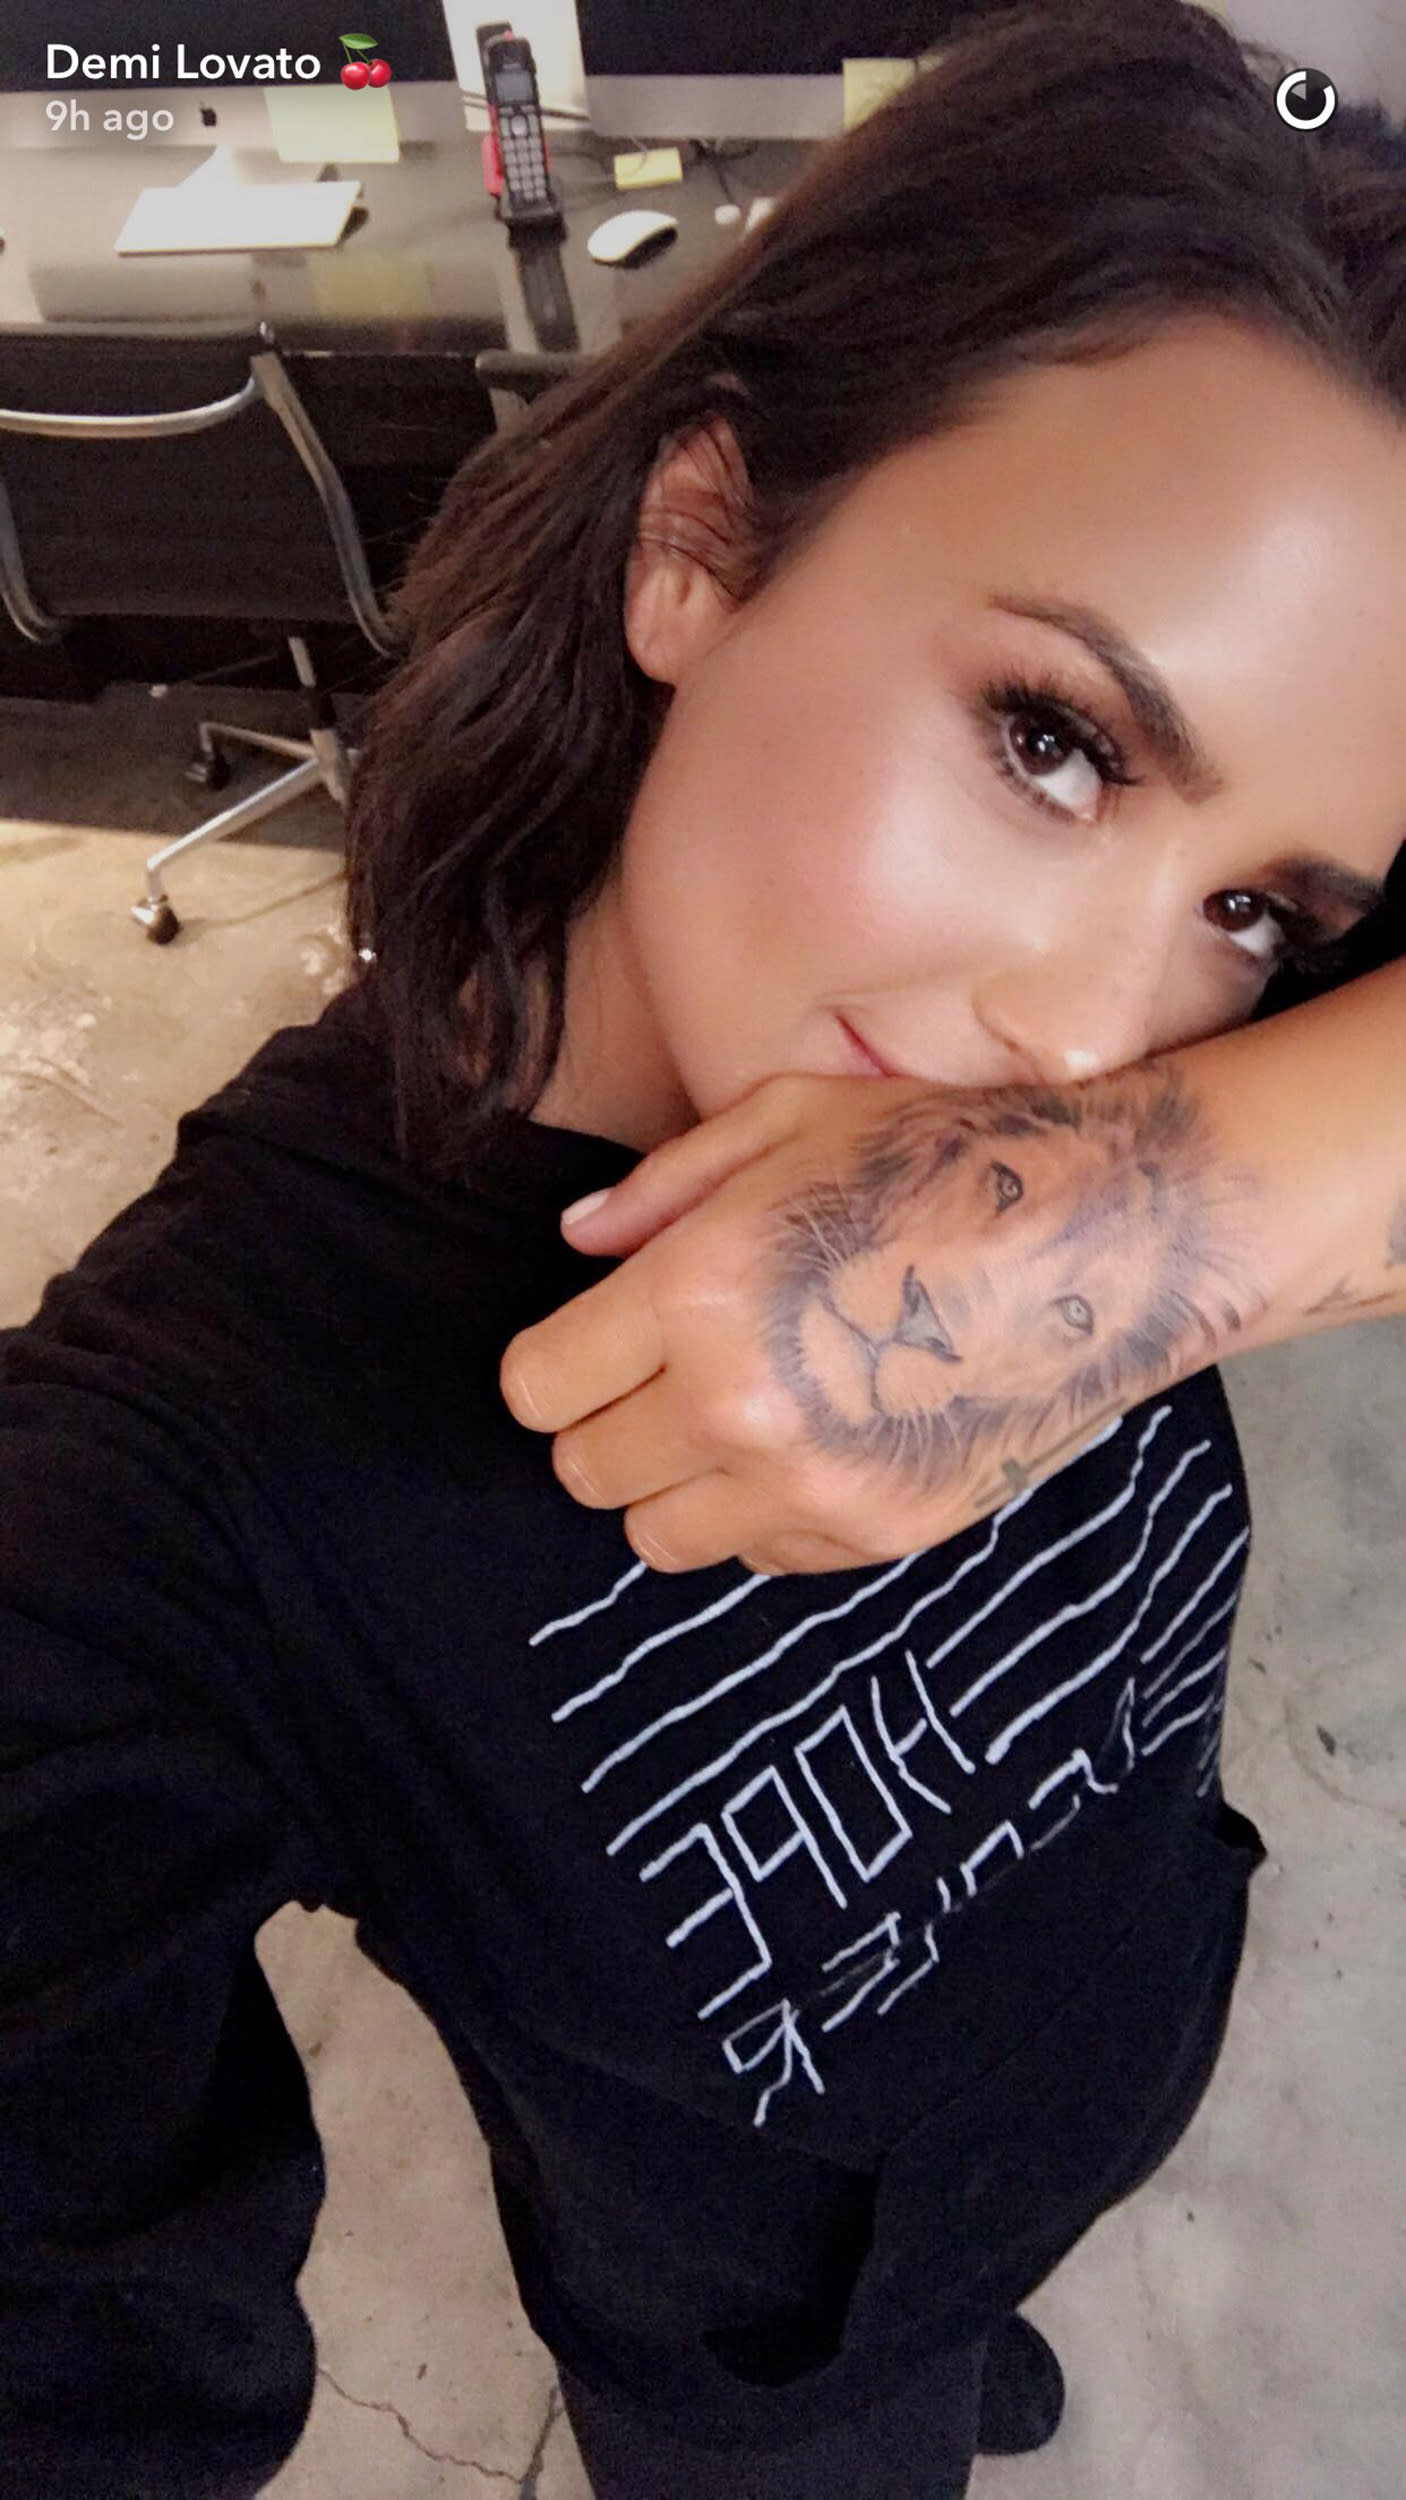 Demi Lovatos 20 Tattoos and Their Meanings A Complete Guide